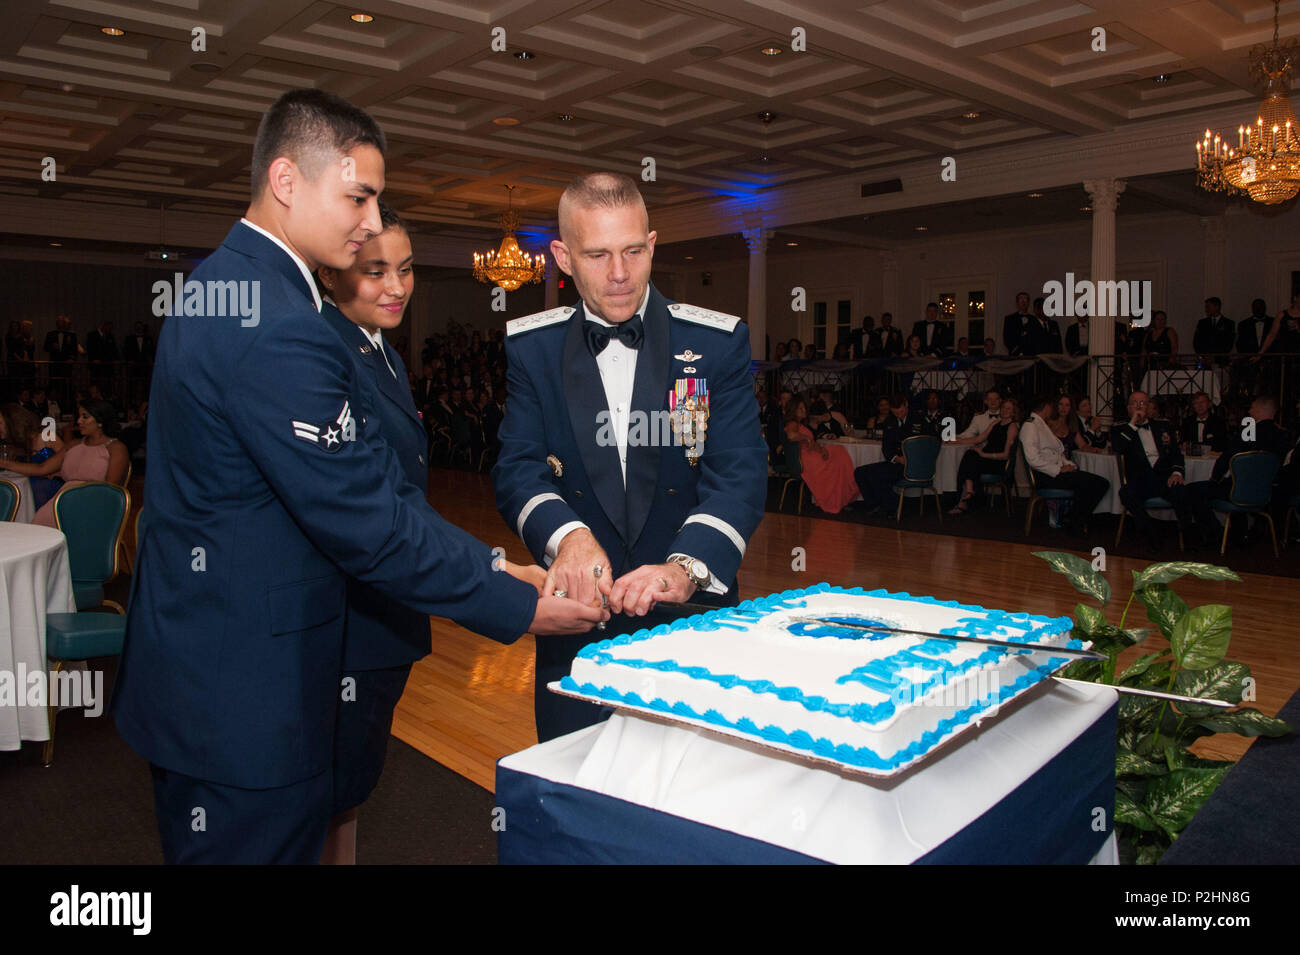 Maxwell AFB, Ala. - (L-R) Airmen First Class Anthony Fox and Maria Ramirez join Lieutenant General Steven Kwast, Commander and President, Air University, in cutting the ceremonial cake for the 2016 Air Force Ball celebrating the 69th Birthday of the United States Air Force on Sep 16, 2016. (US Air Force photo by Bud Hancock/Released) Stock Photo